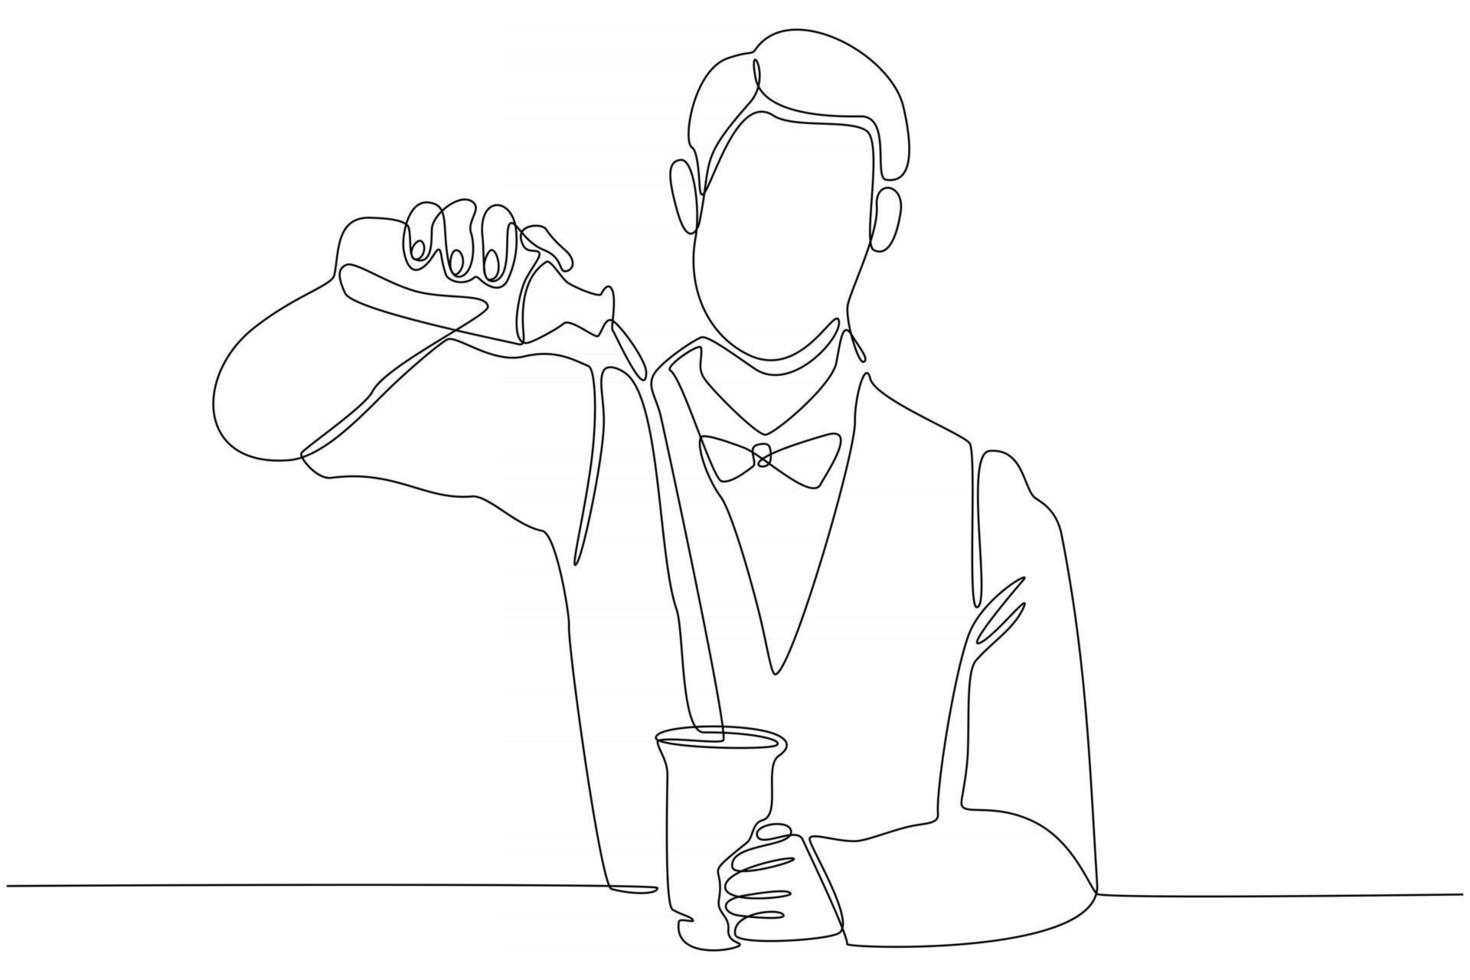 continuous line worker bar vector illustration